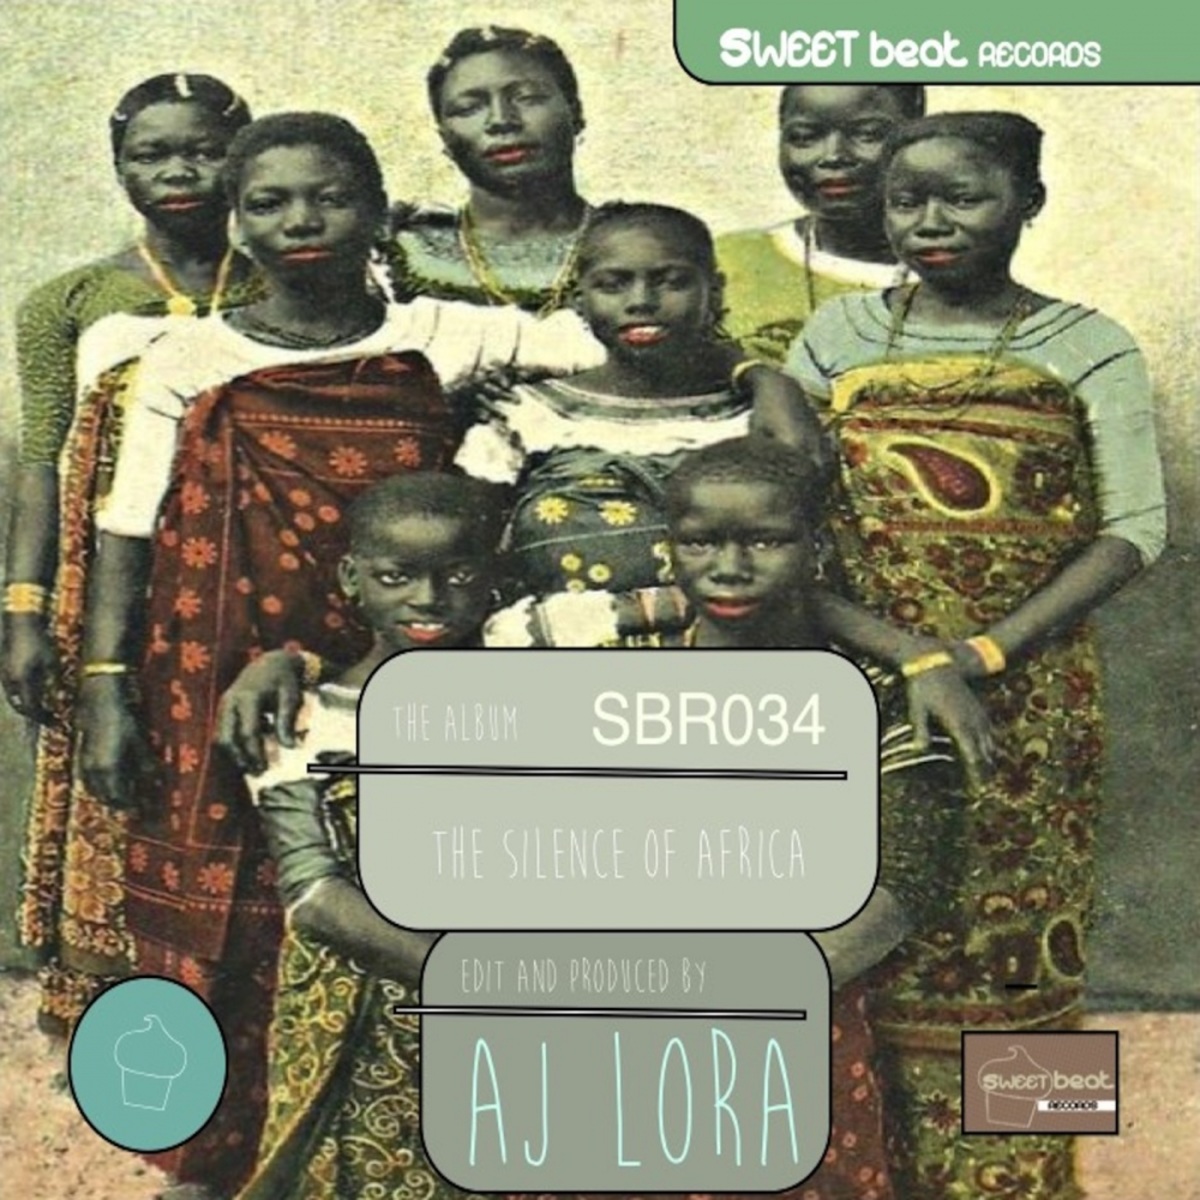 Aj Lora - The Silence of Africa / SWEET beat RECORDS